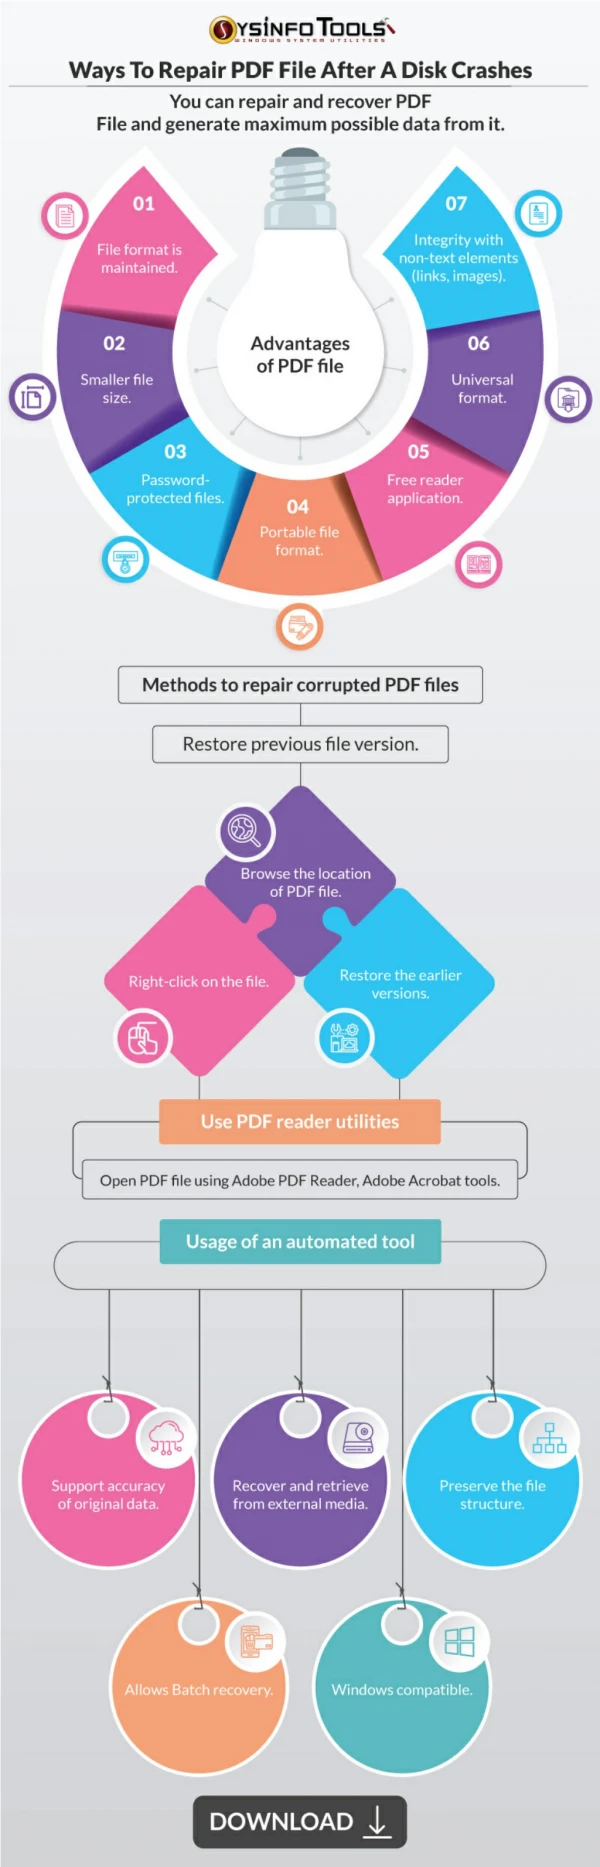 How to Repair PDF Files After Disk Crash Manually